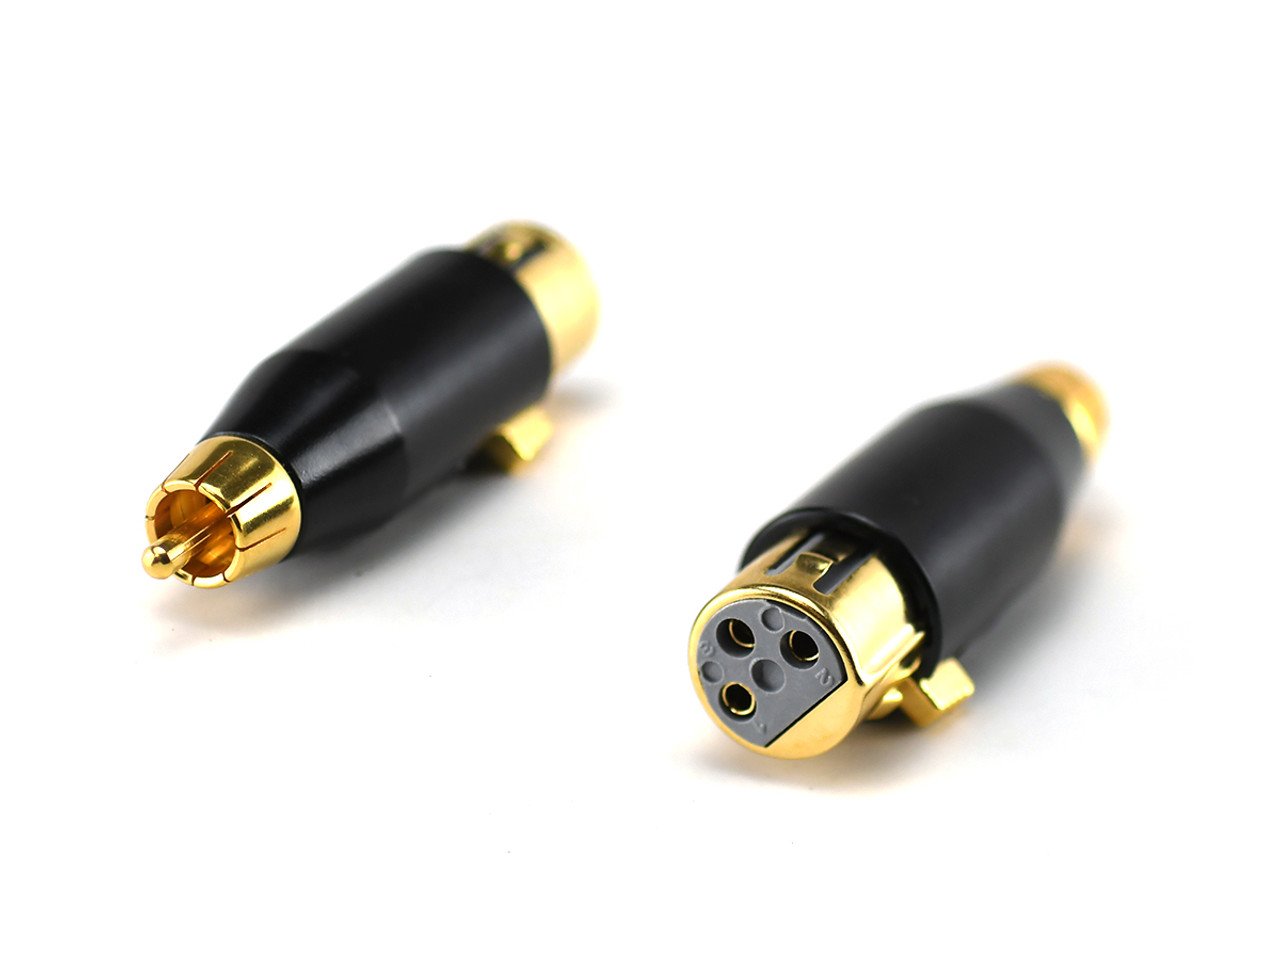 RCA Cables & Adapters